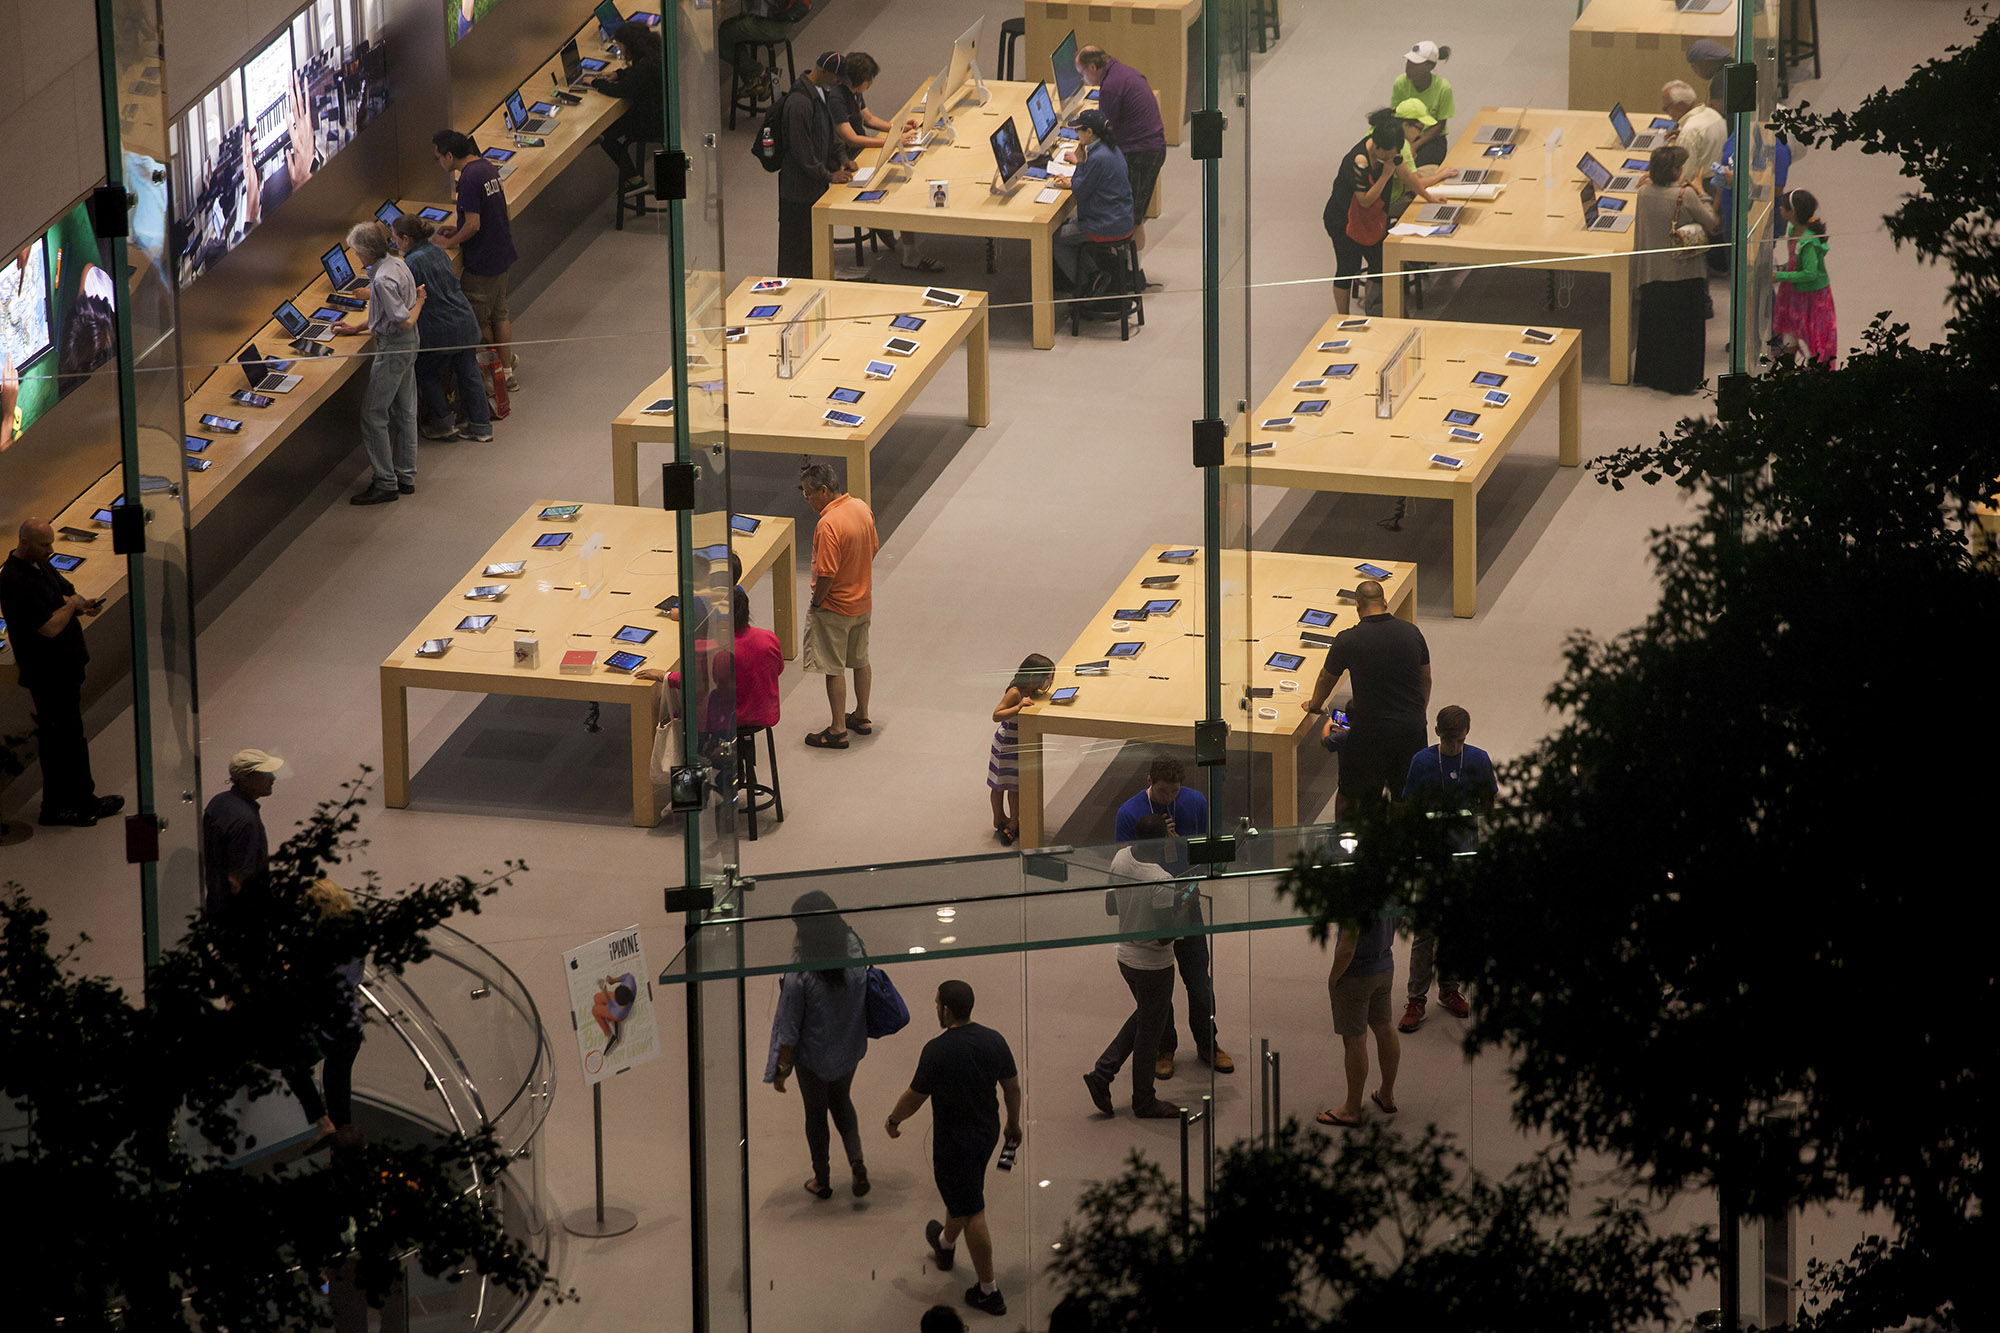 Shoppers look at products at the Upper West Side Apple Inc. store in New York.